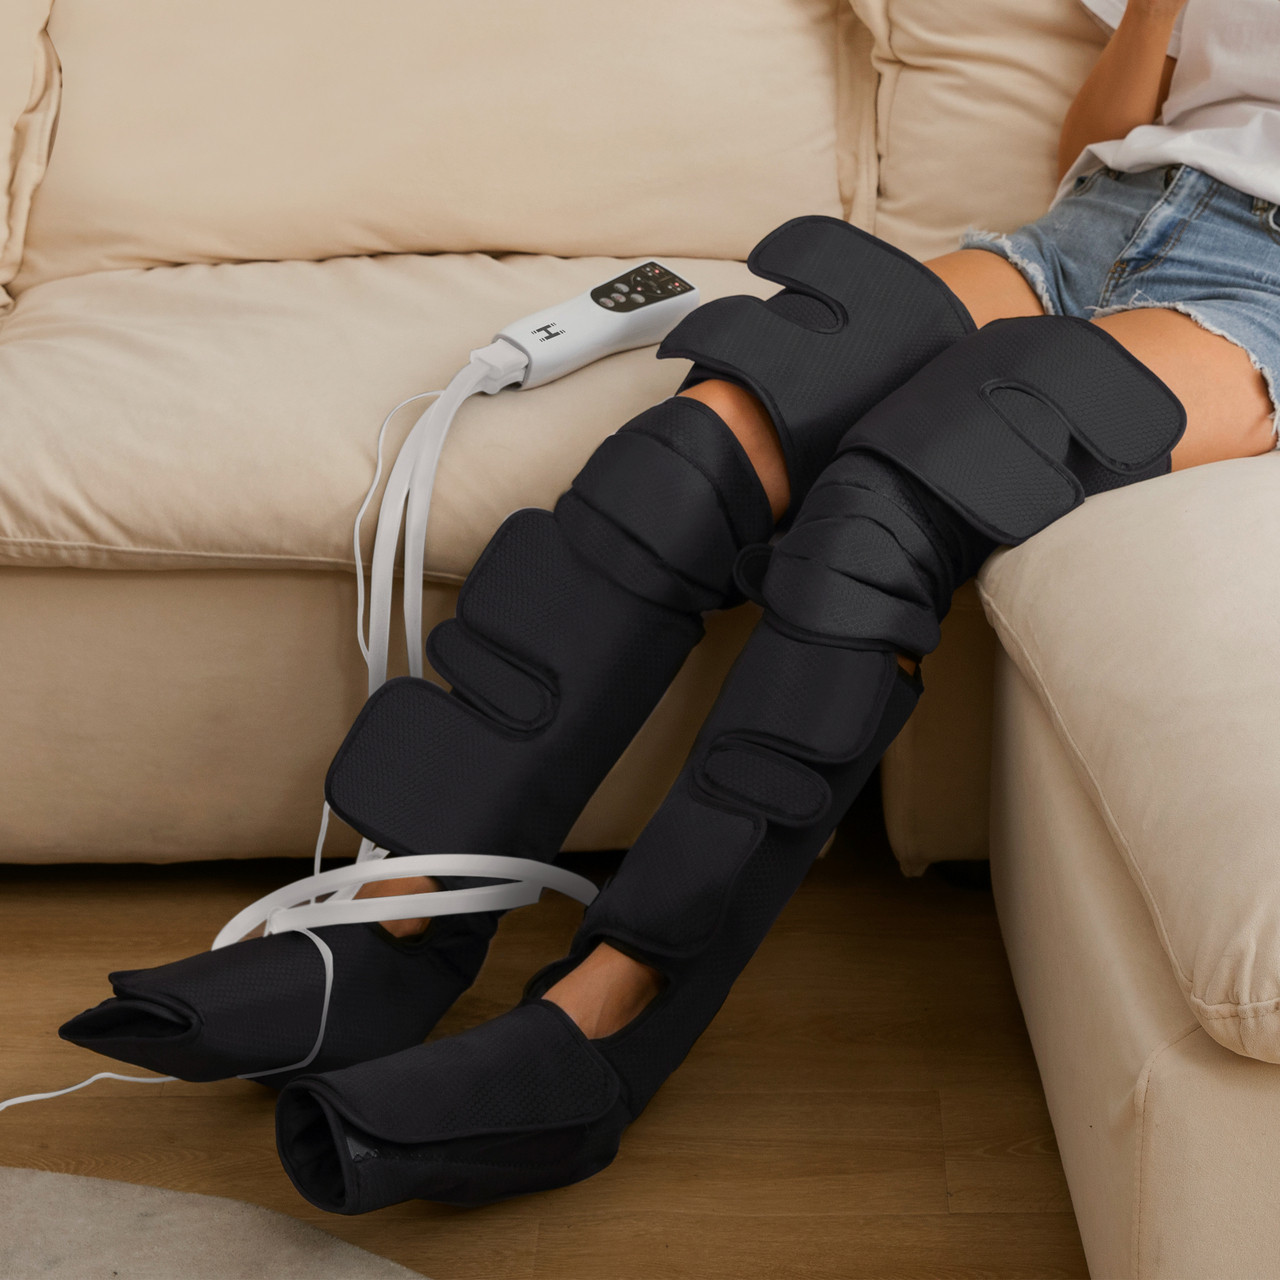 Save $75 on this at-home leg compression therapy solution